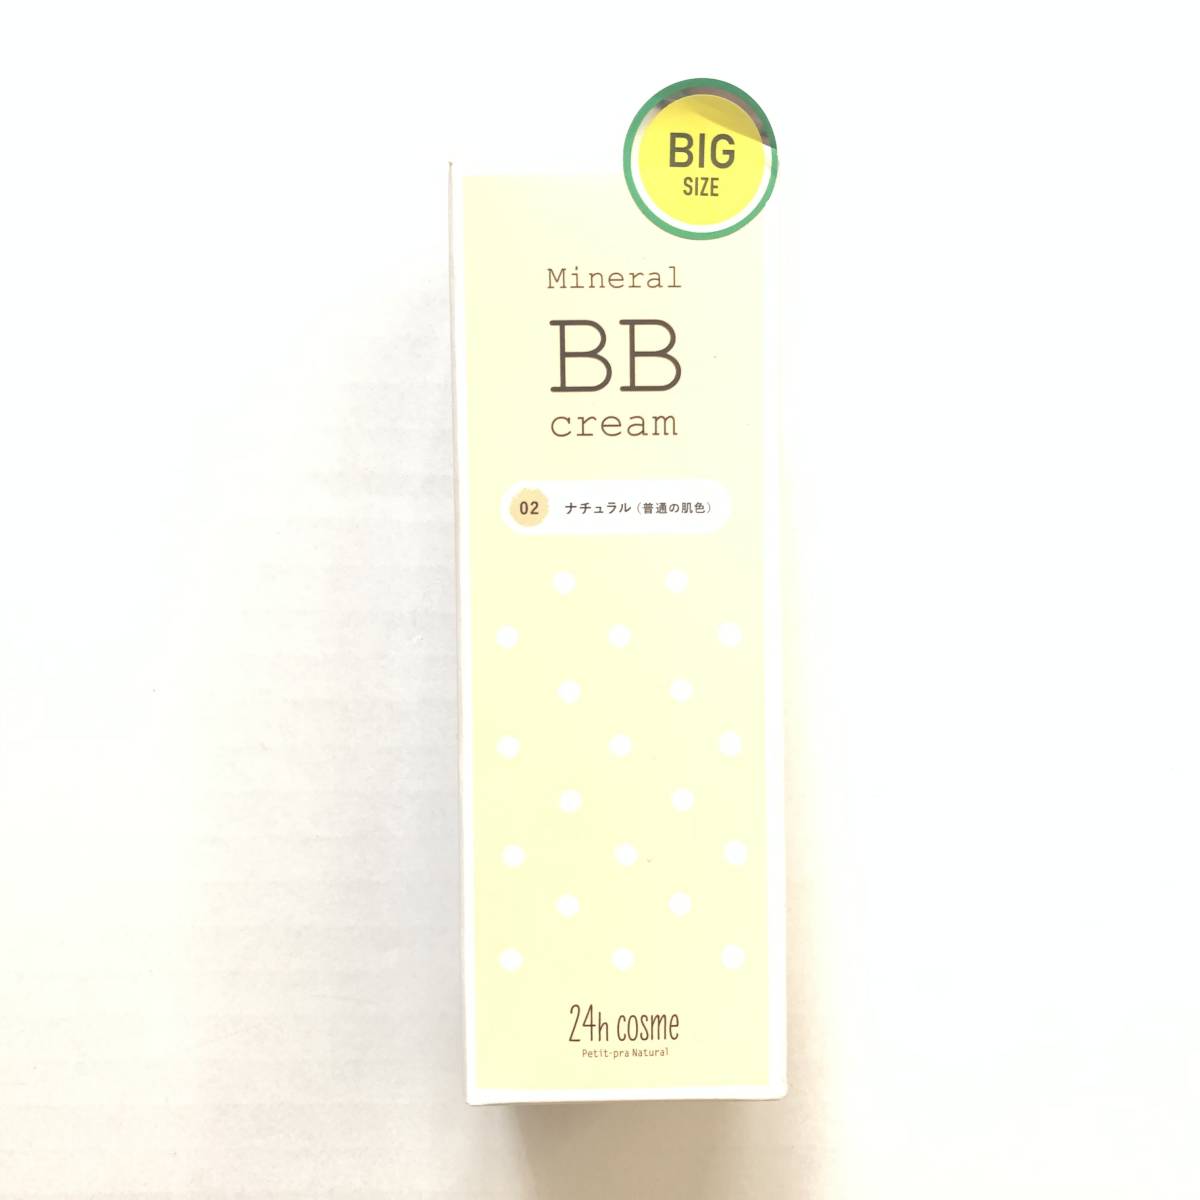  new goods *24h cosme (24h cosme ) 24 mineral BB cream BIG size 02 natural ( makeup base * foundation )*